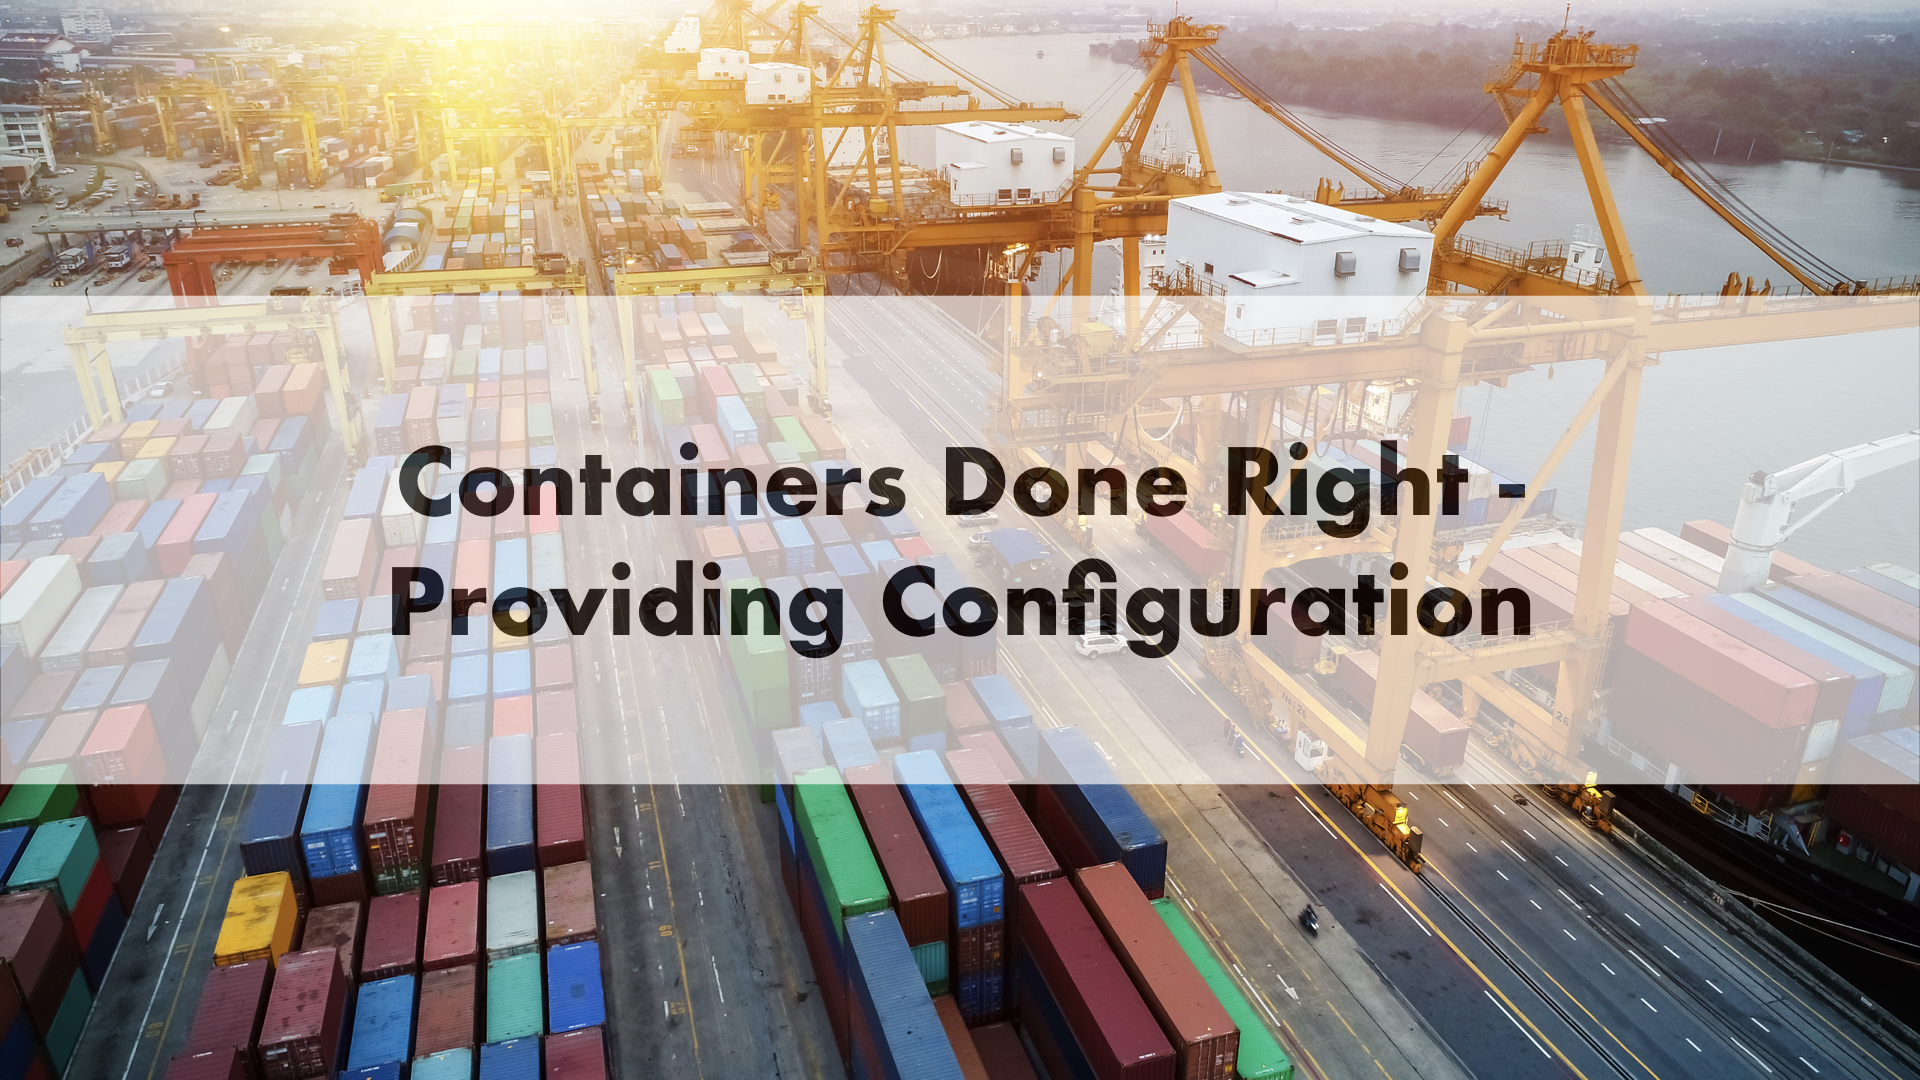 Containers done right - providing configuration